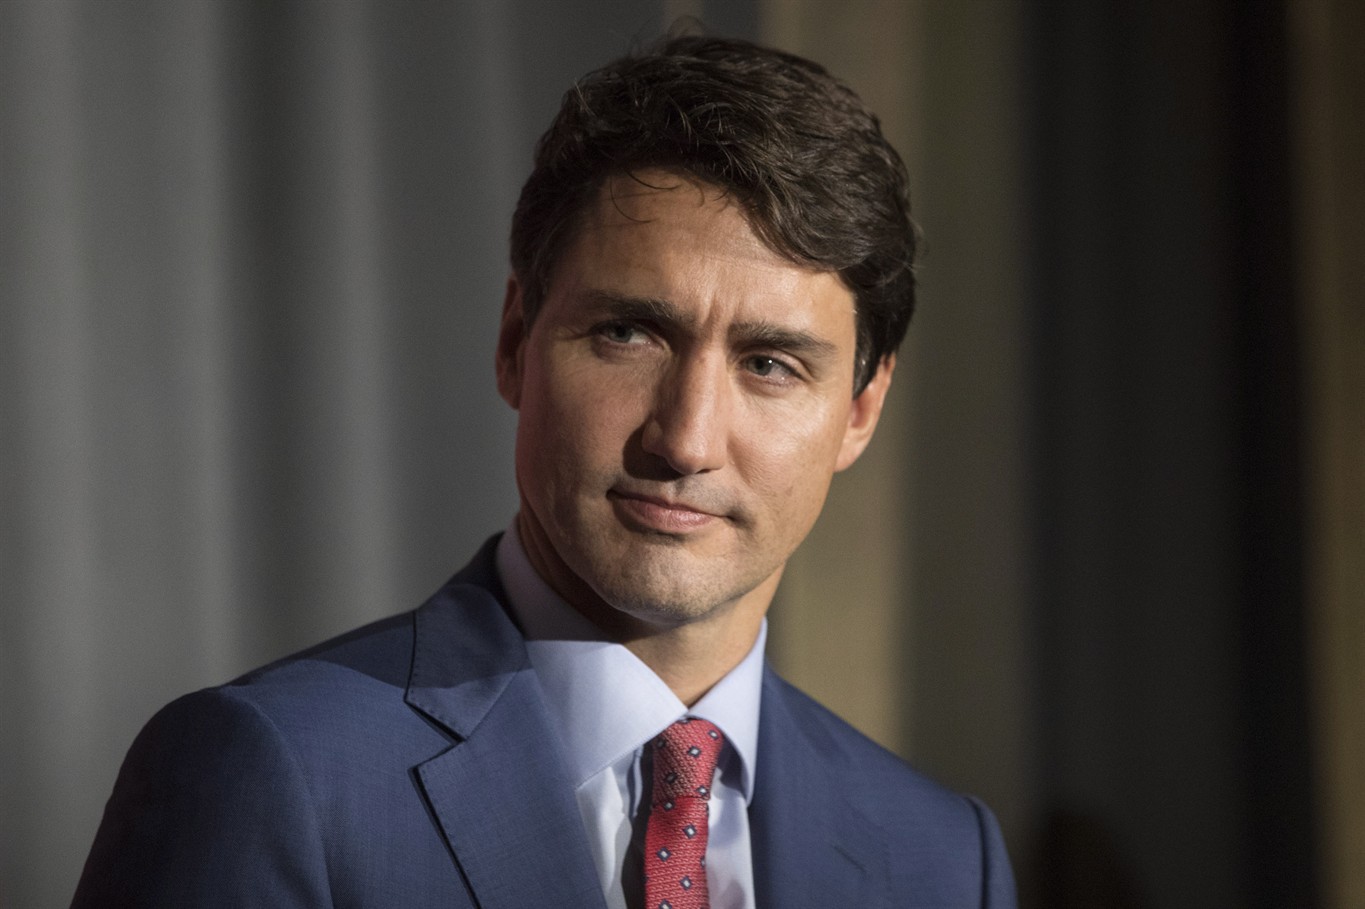 carbon-tax-puts-a-price-on-pollution-trudeau-says-in-one-on-one